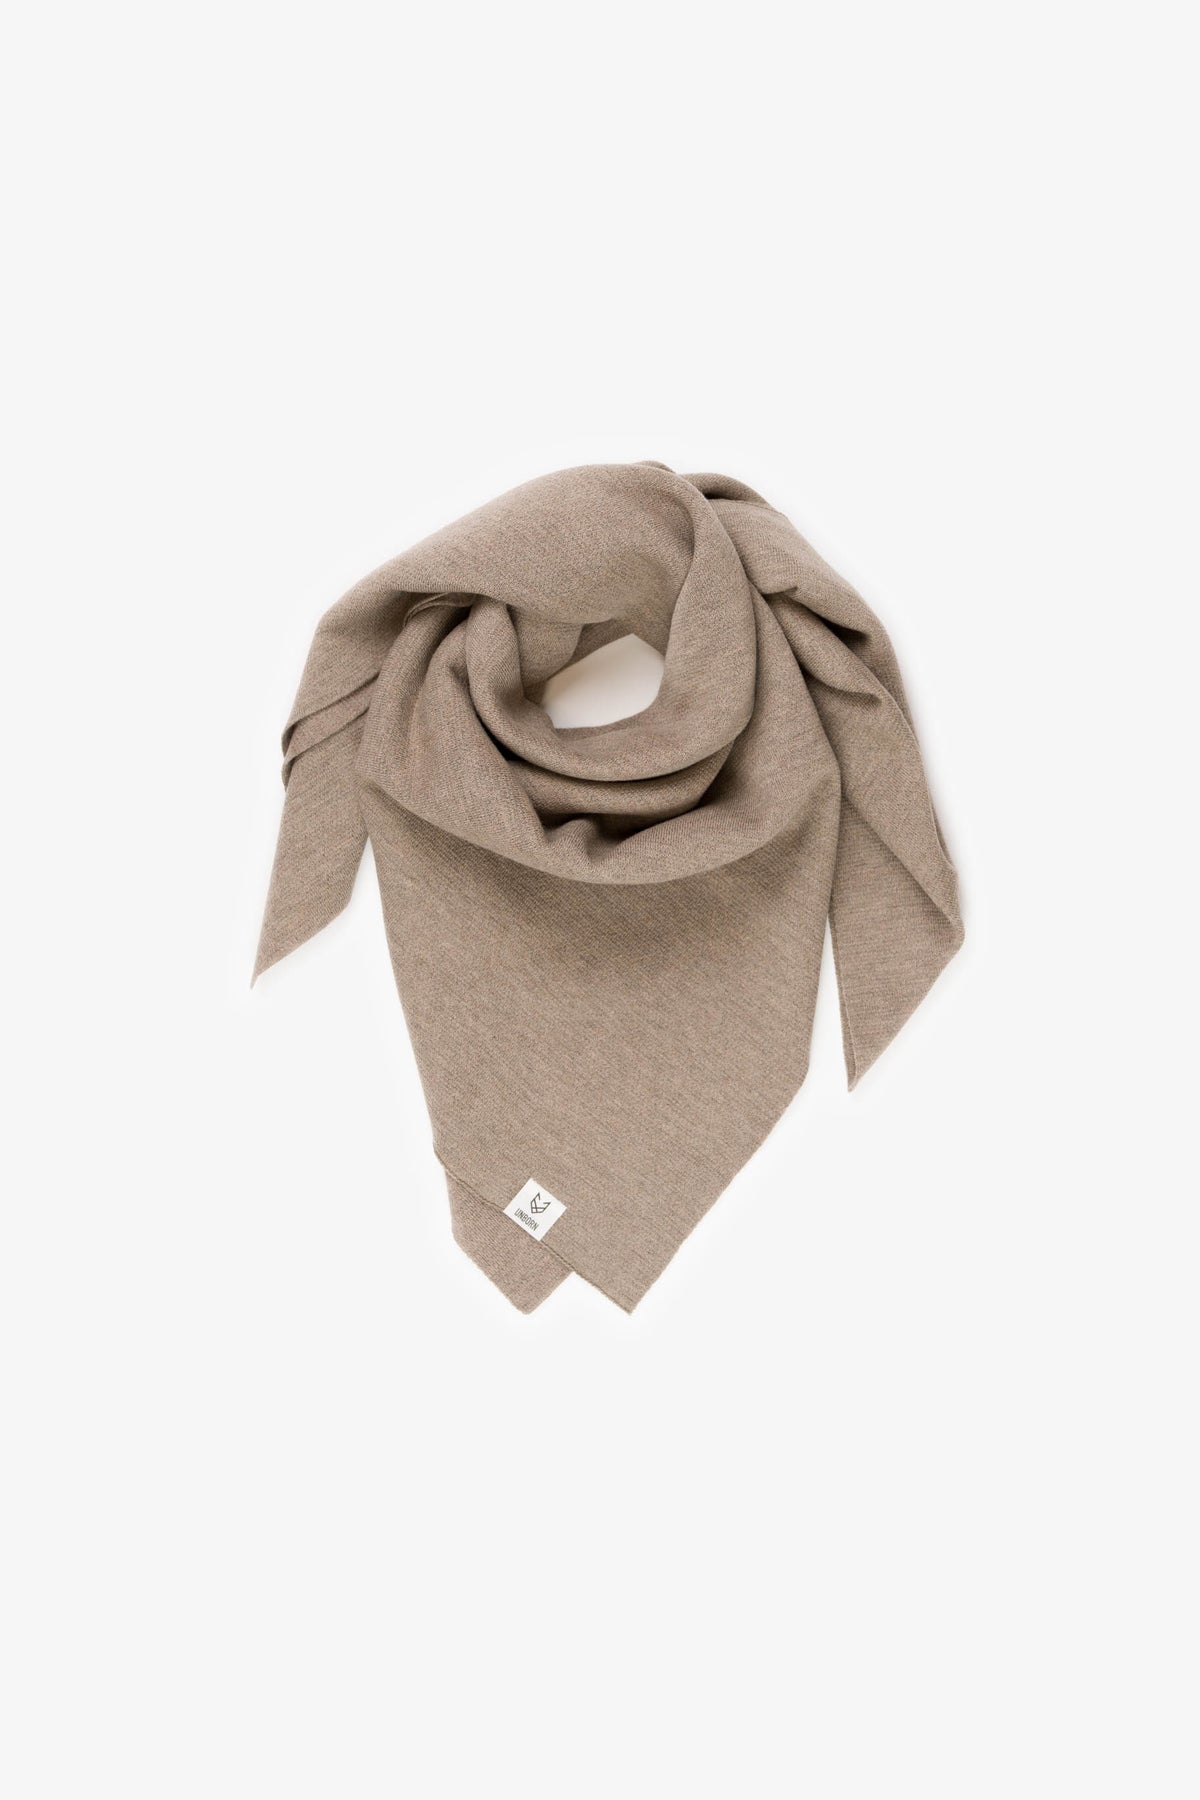 The Merino Wool Square Scarf Beige, wrapped flat - Unborn